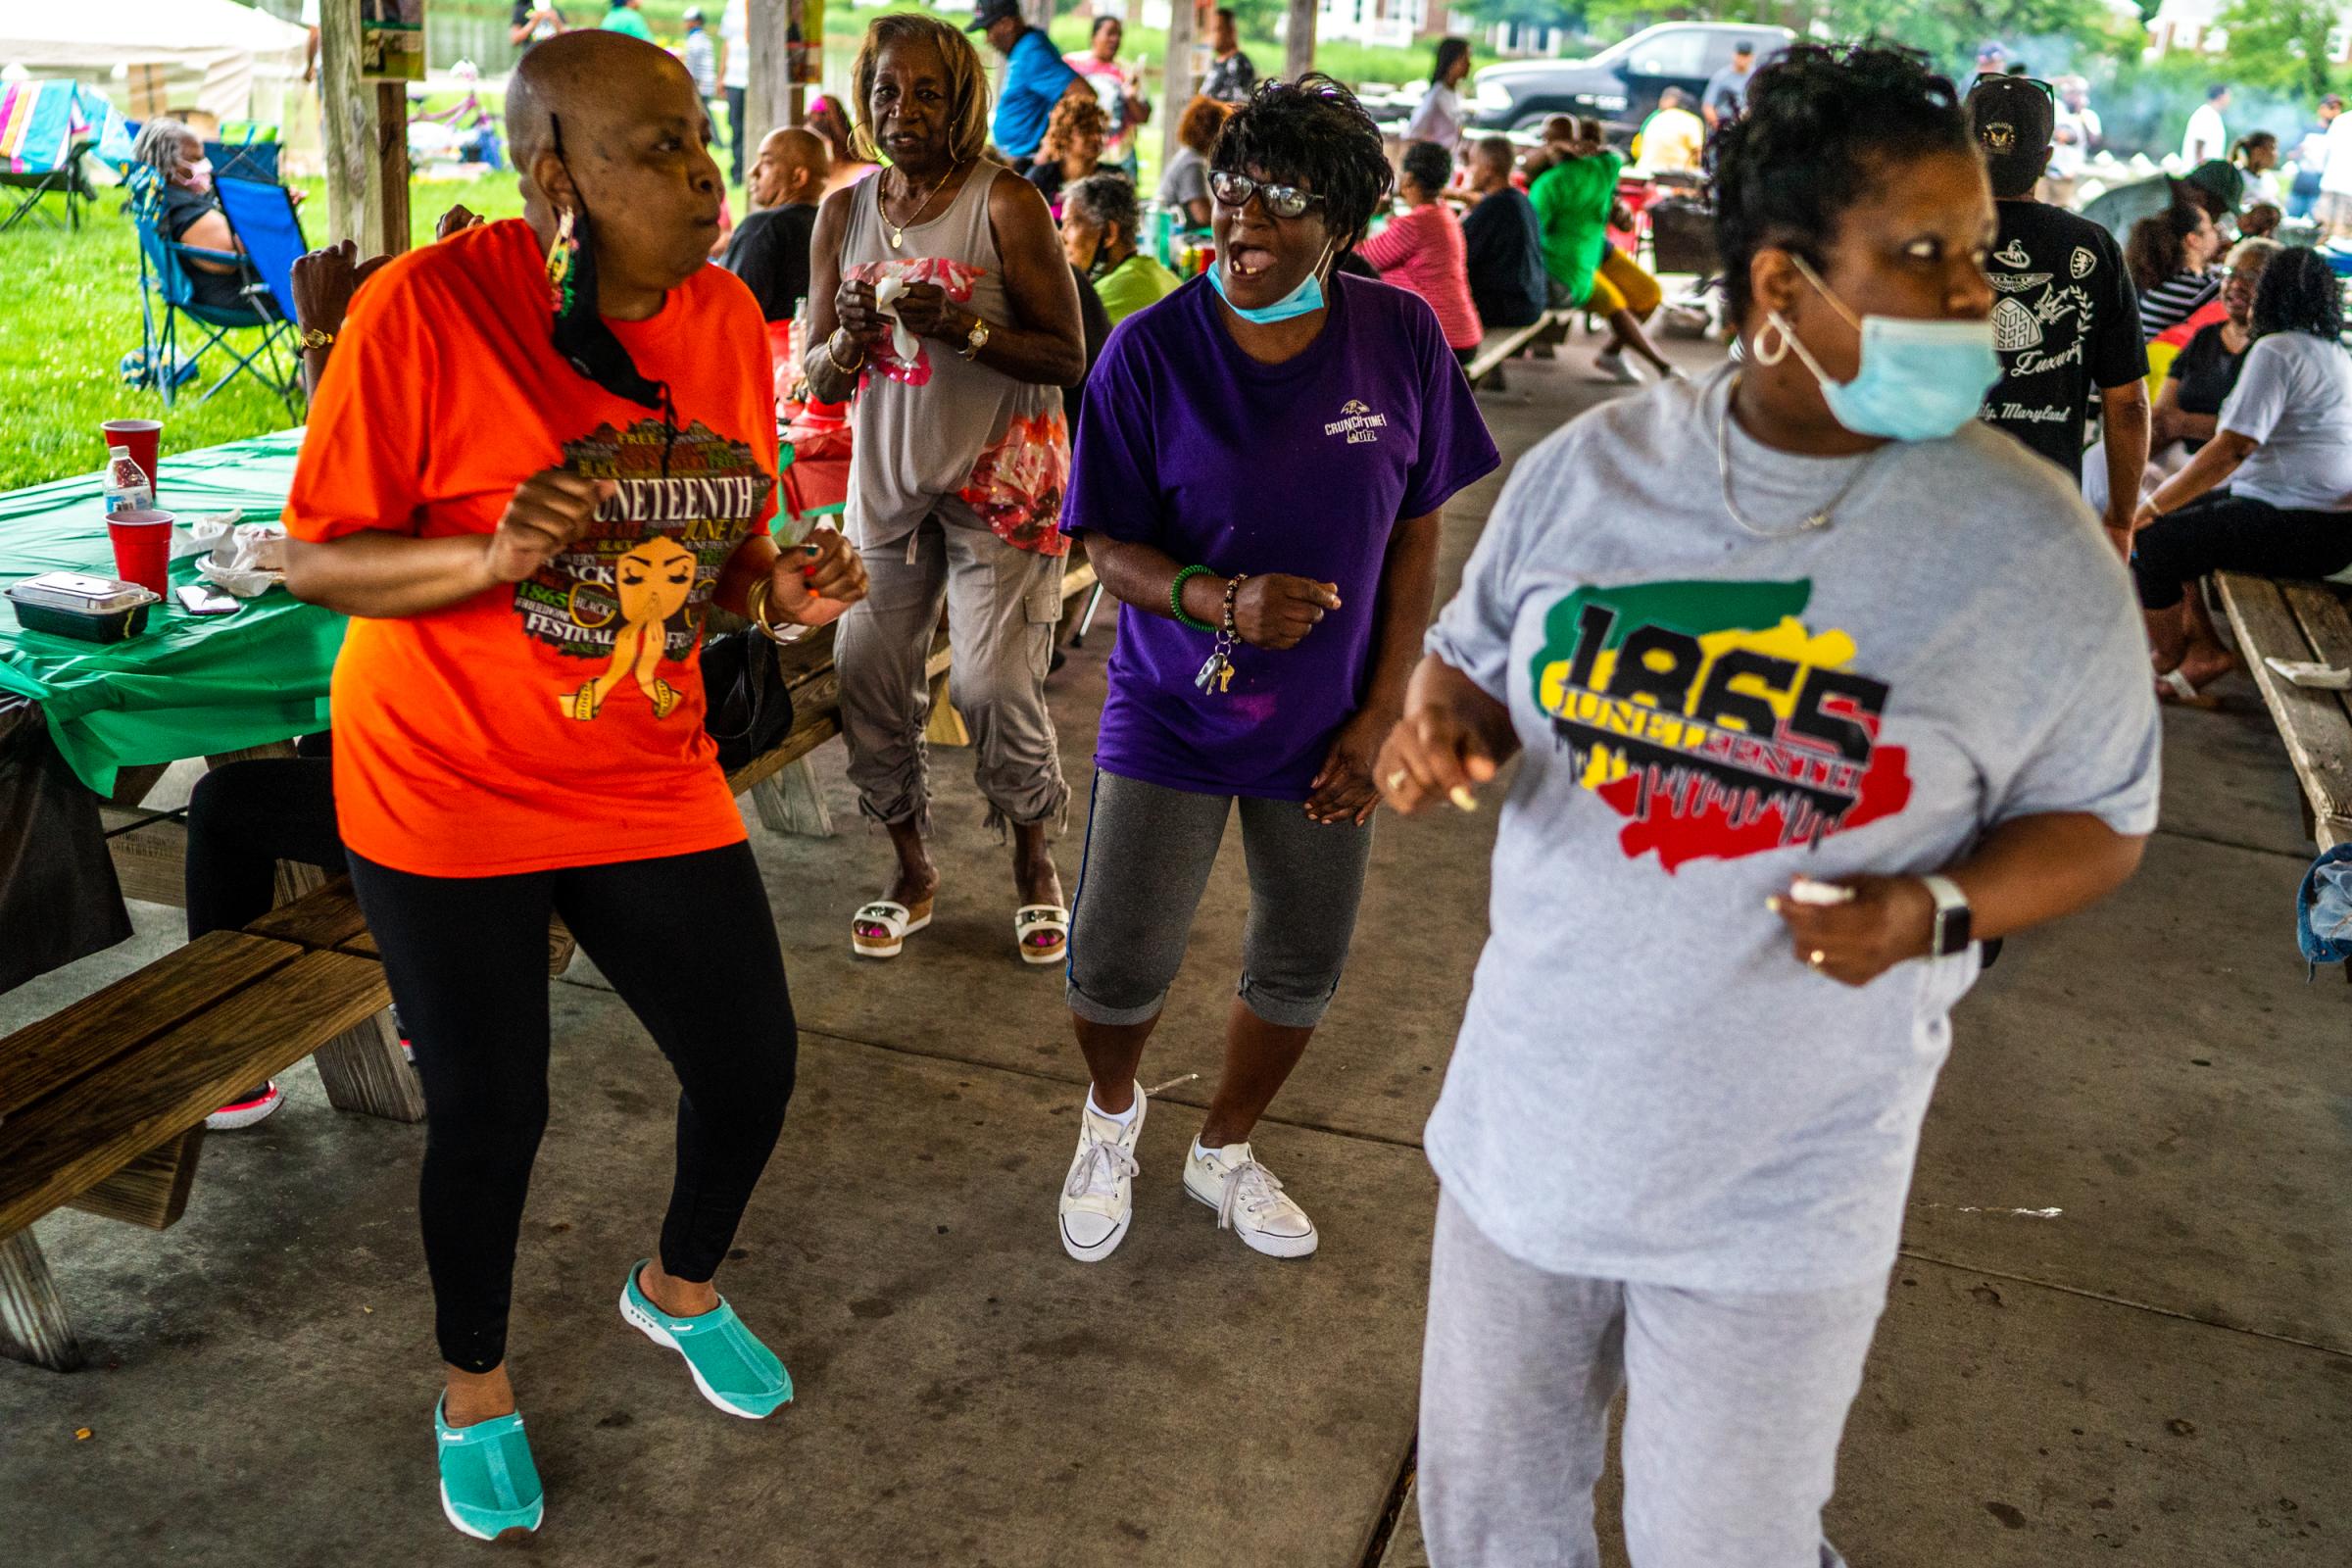 A group of women dance at Turner Station&rsquo;s Juneteenth Party on June 19, 2021 in Turner Station Park. &ldquo;We wanted to tell people to put your guns down and love one another,&rdquo; said Chanetta Reed, one of the event organizers (not pictured). &ldquo;That&rsquo;s why we did this, so we could love on one another. &hellip; This is my community.&rdquo;